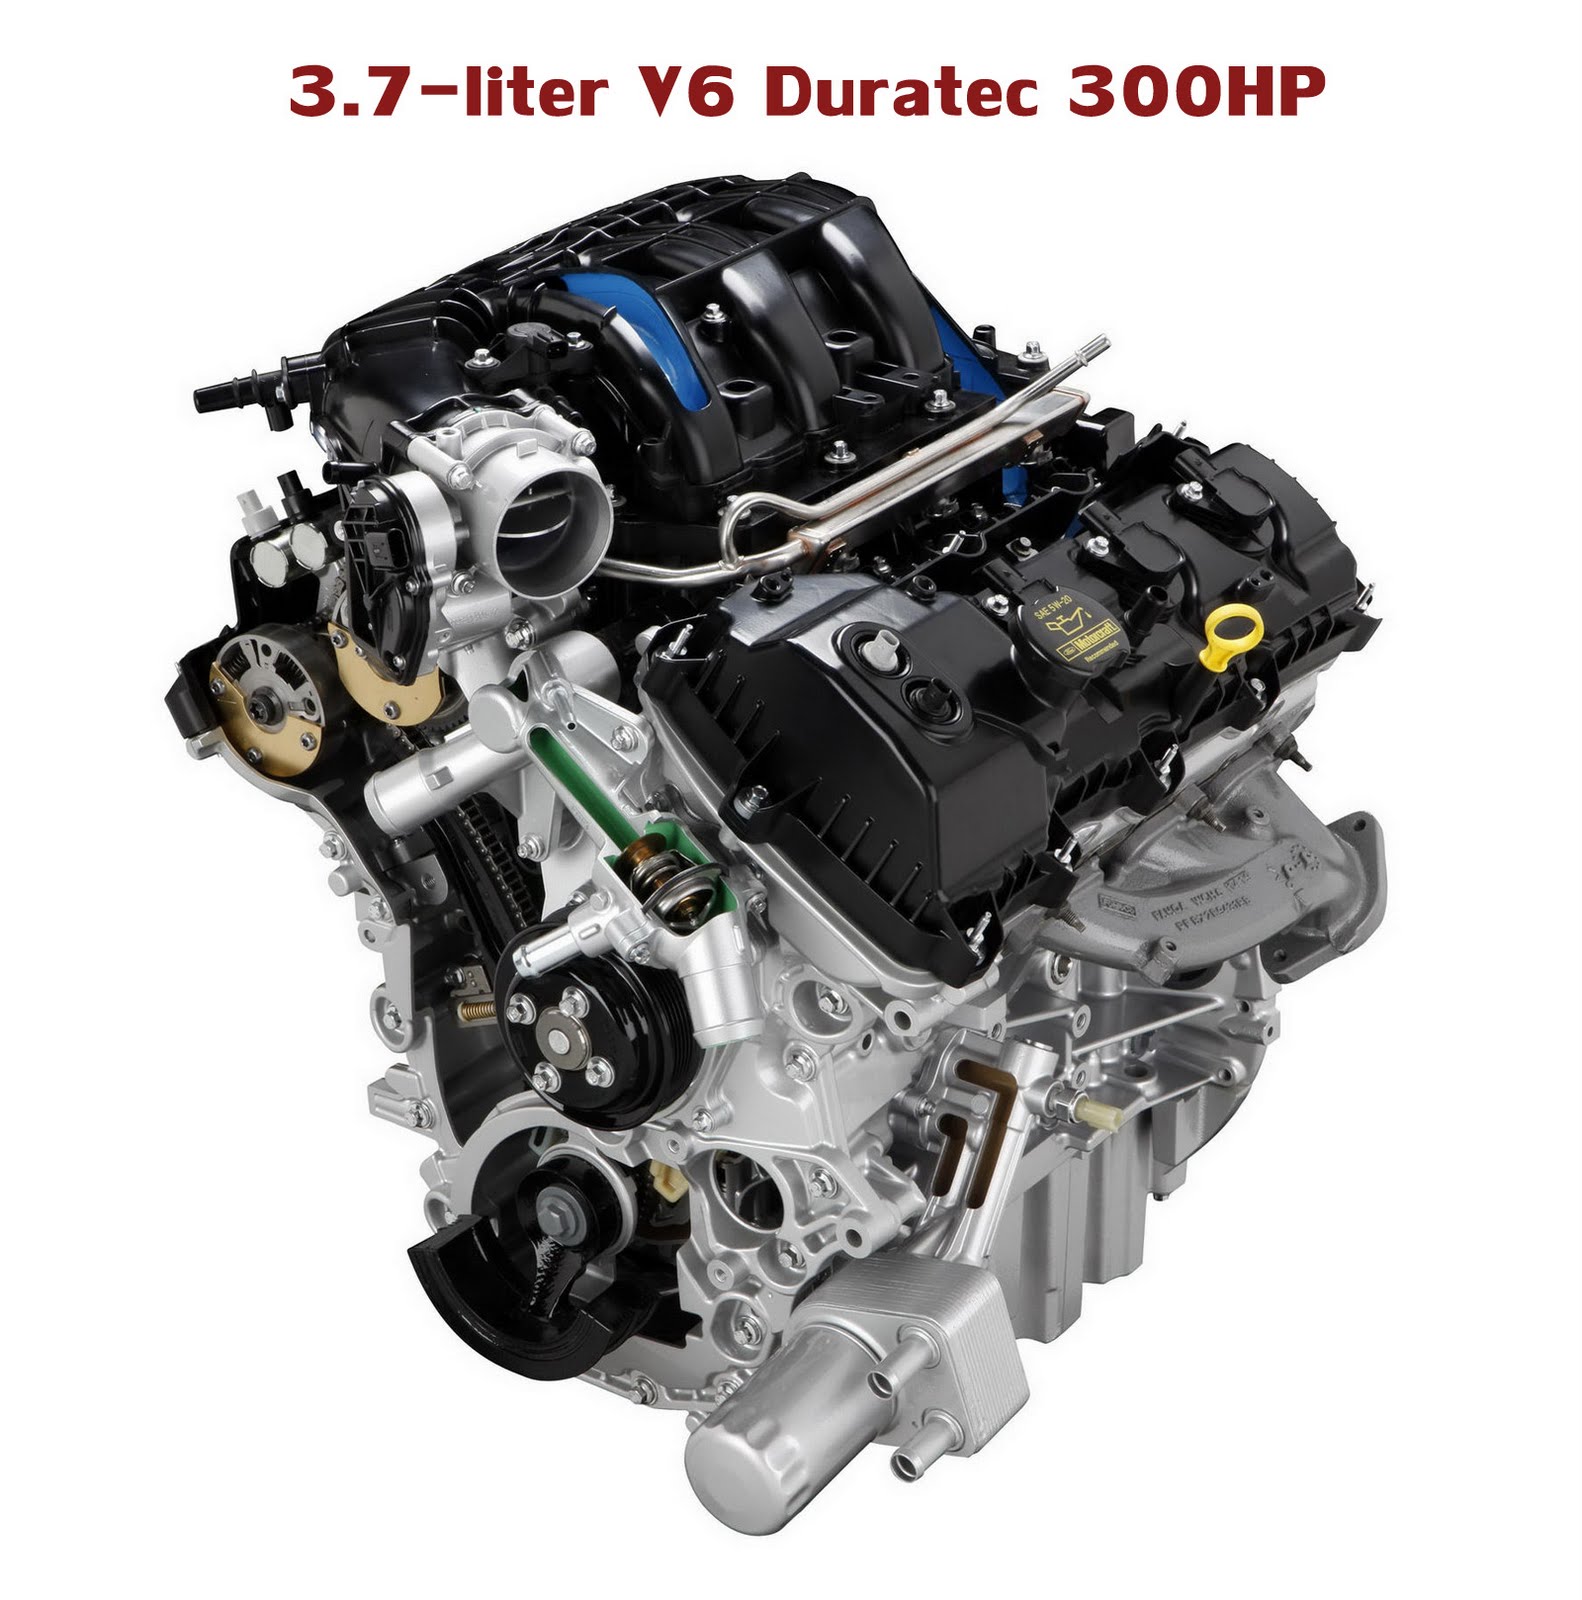 1.6 l duratec ti vct sigma. 3.5 V6 Ford Duratec. Duratec v6 181. Ford 3.5 ECOBOOST двигатель. Ford 2.7 ECOBOOST.